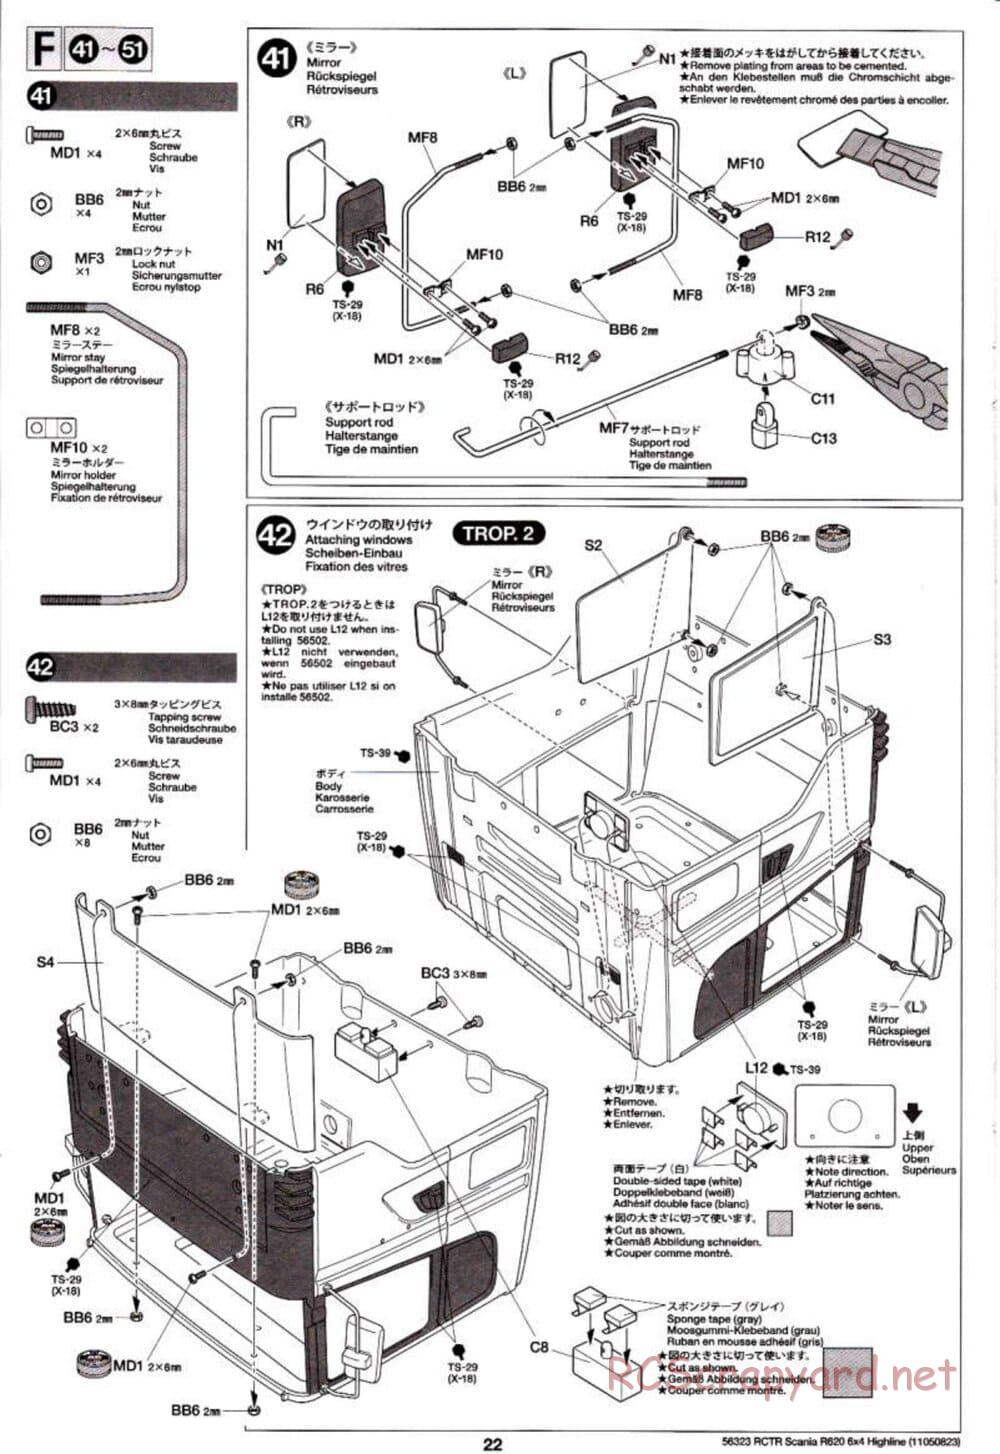 Tamiya - Scania R620 6x4 Highline Tractor Truck Chassis - Manual - Page 22